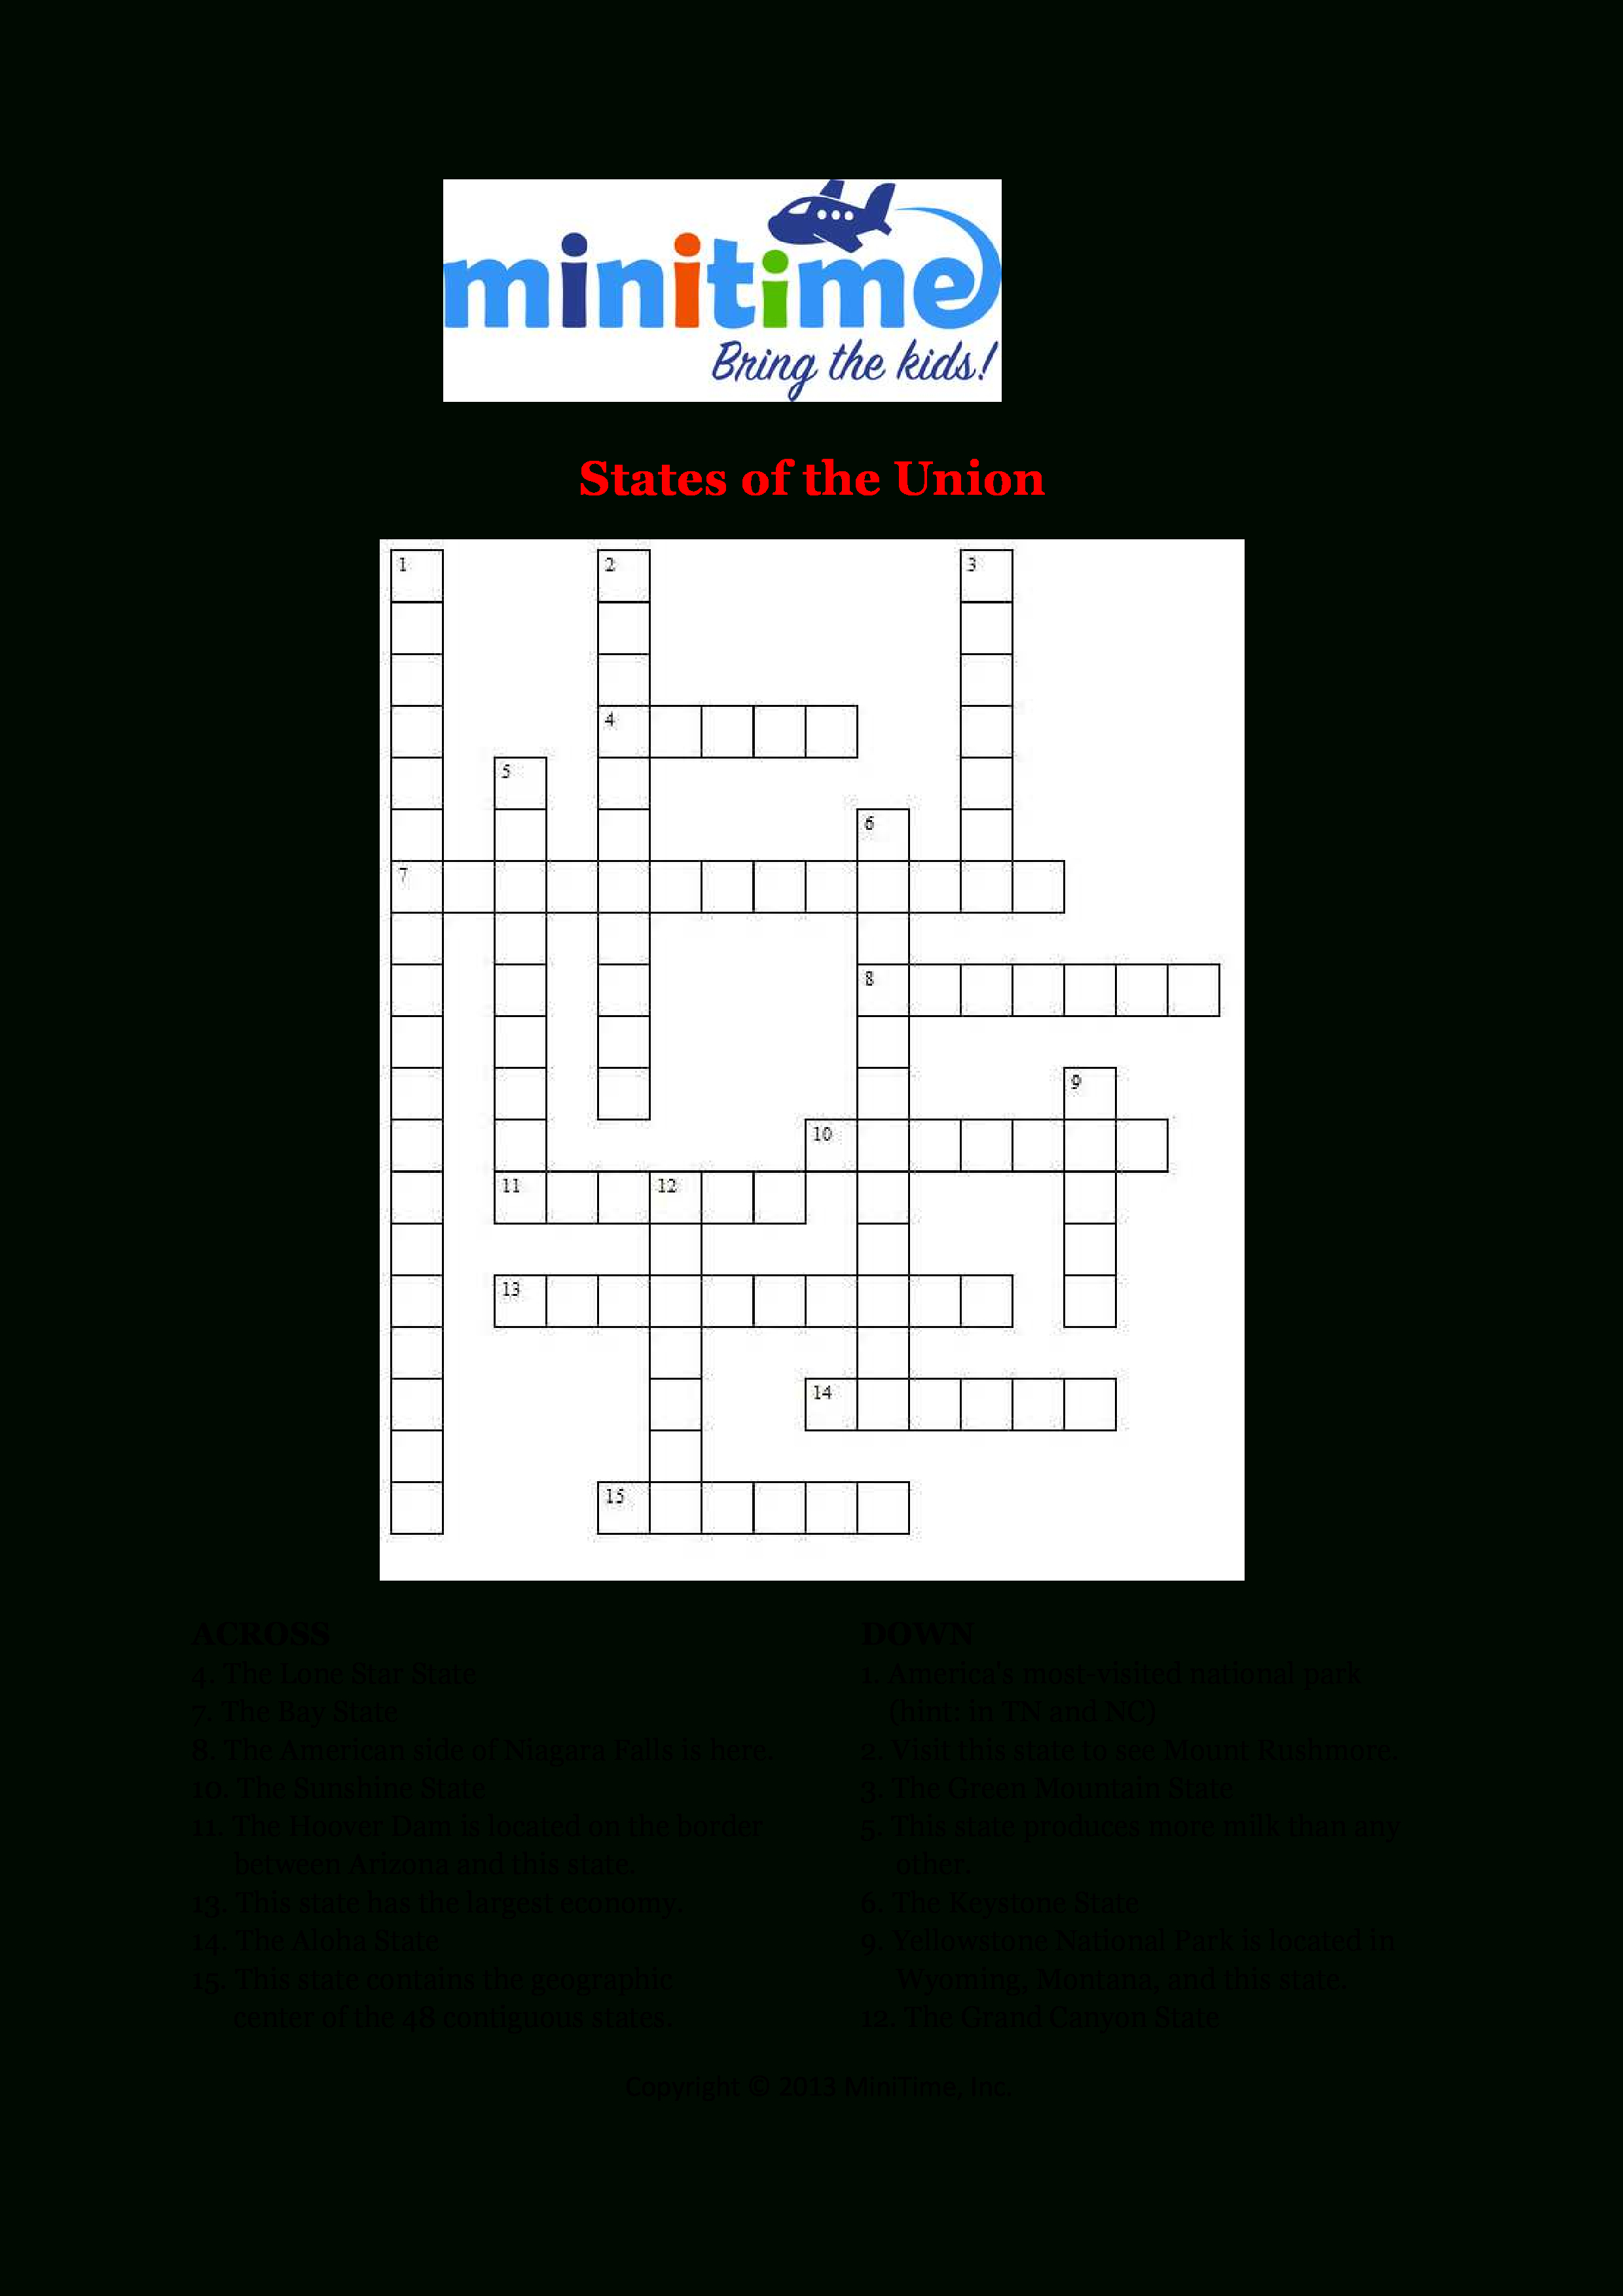 Us States Fun Facts Crossword Puzzles | Free Printable Travel - Printable Car Crossword Puzzles